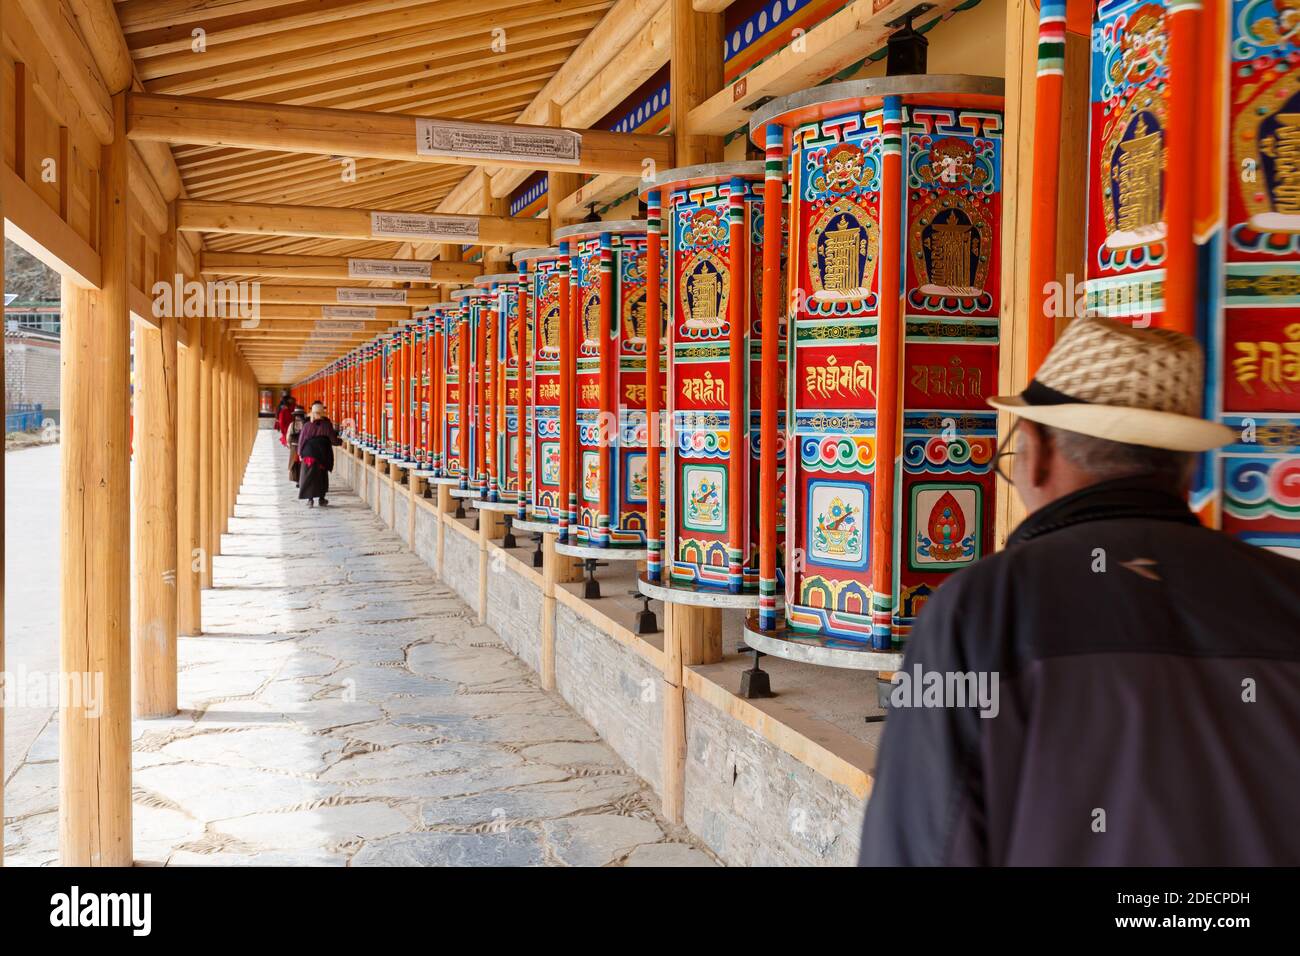 Xiahe, Gansu Province / China - April 28, 2017: Colorful prayer wheels at Labrang Monastery. Pilgrims walking by and spinning the wheels. Stock Photo